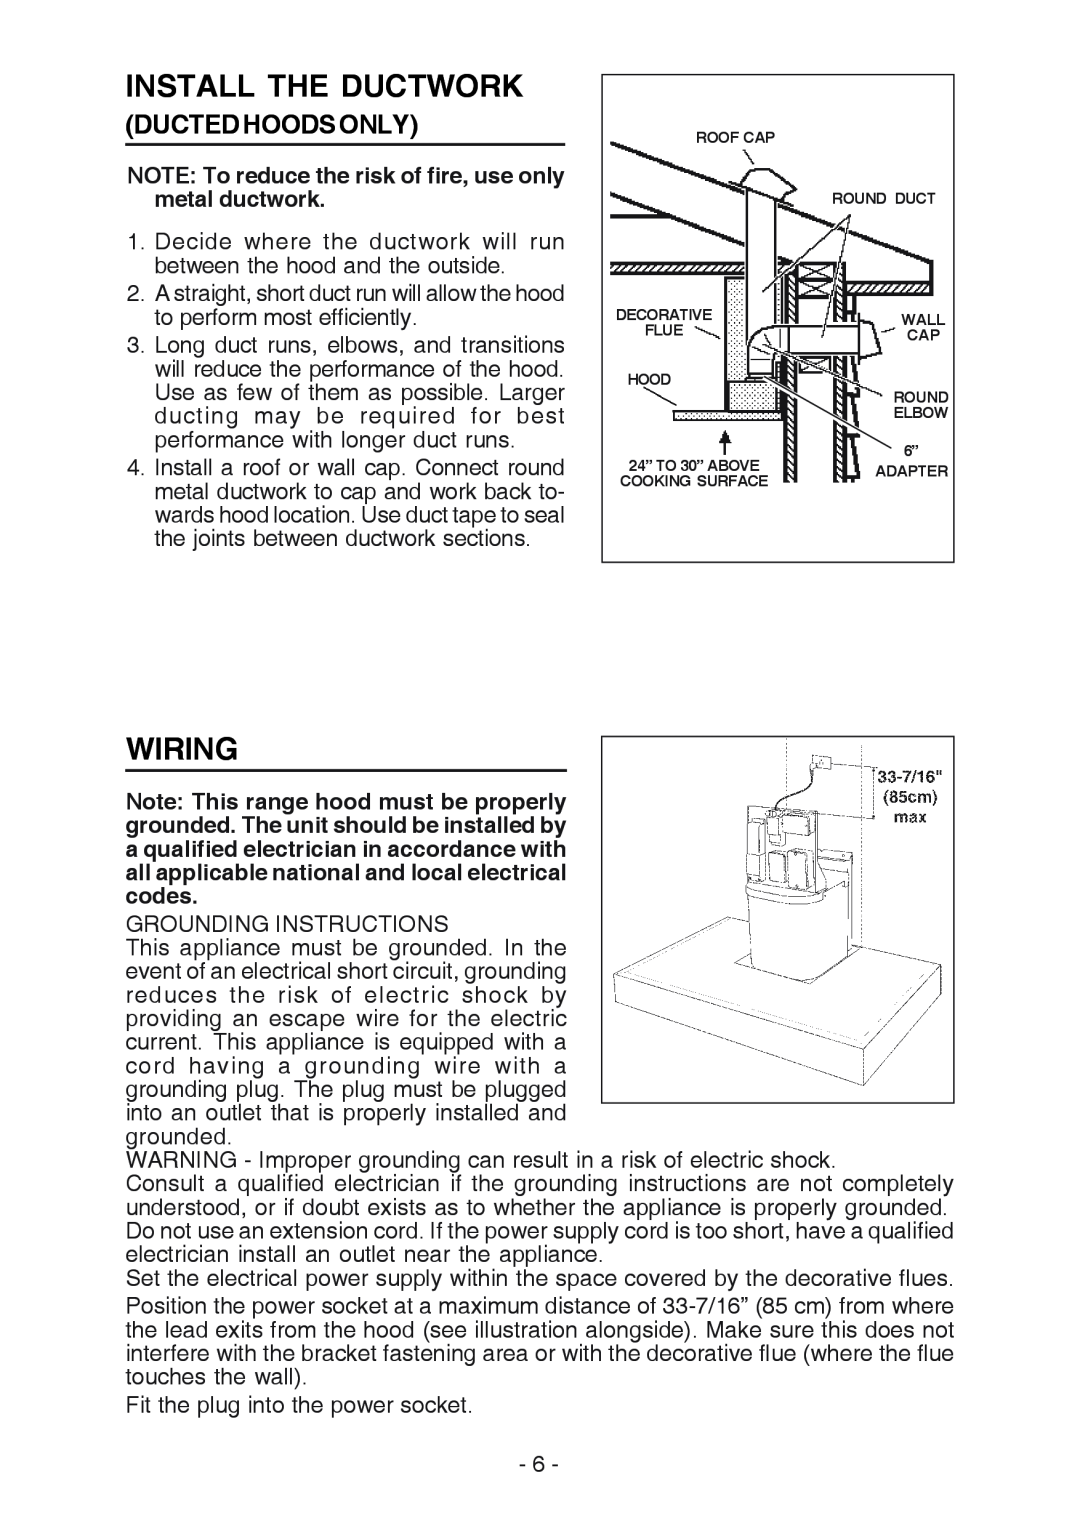 Broan RM533604 Install The Ductwork, Wiring, Ducted Hoods Only, NOTE To reduce the risk of fire, use only metal ductwork 